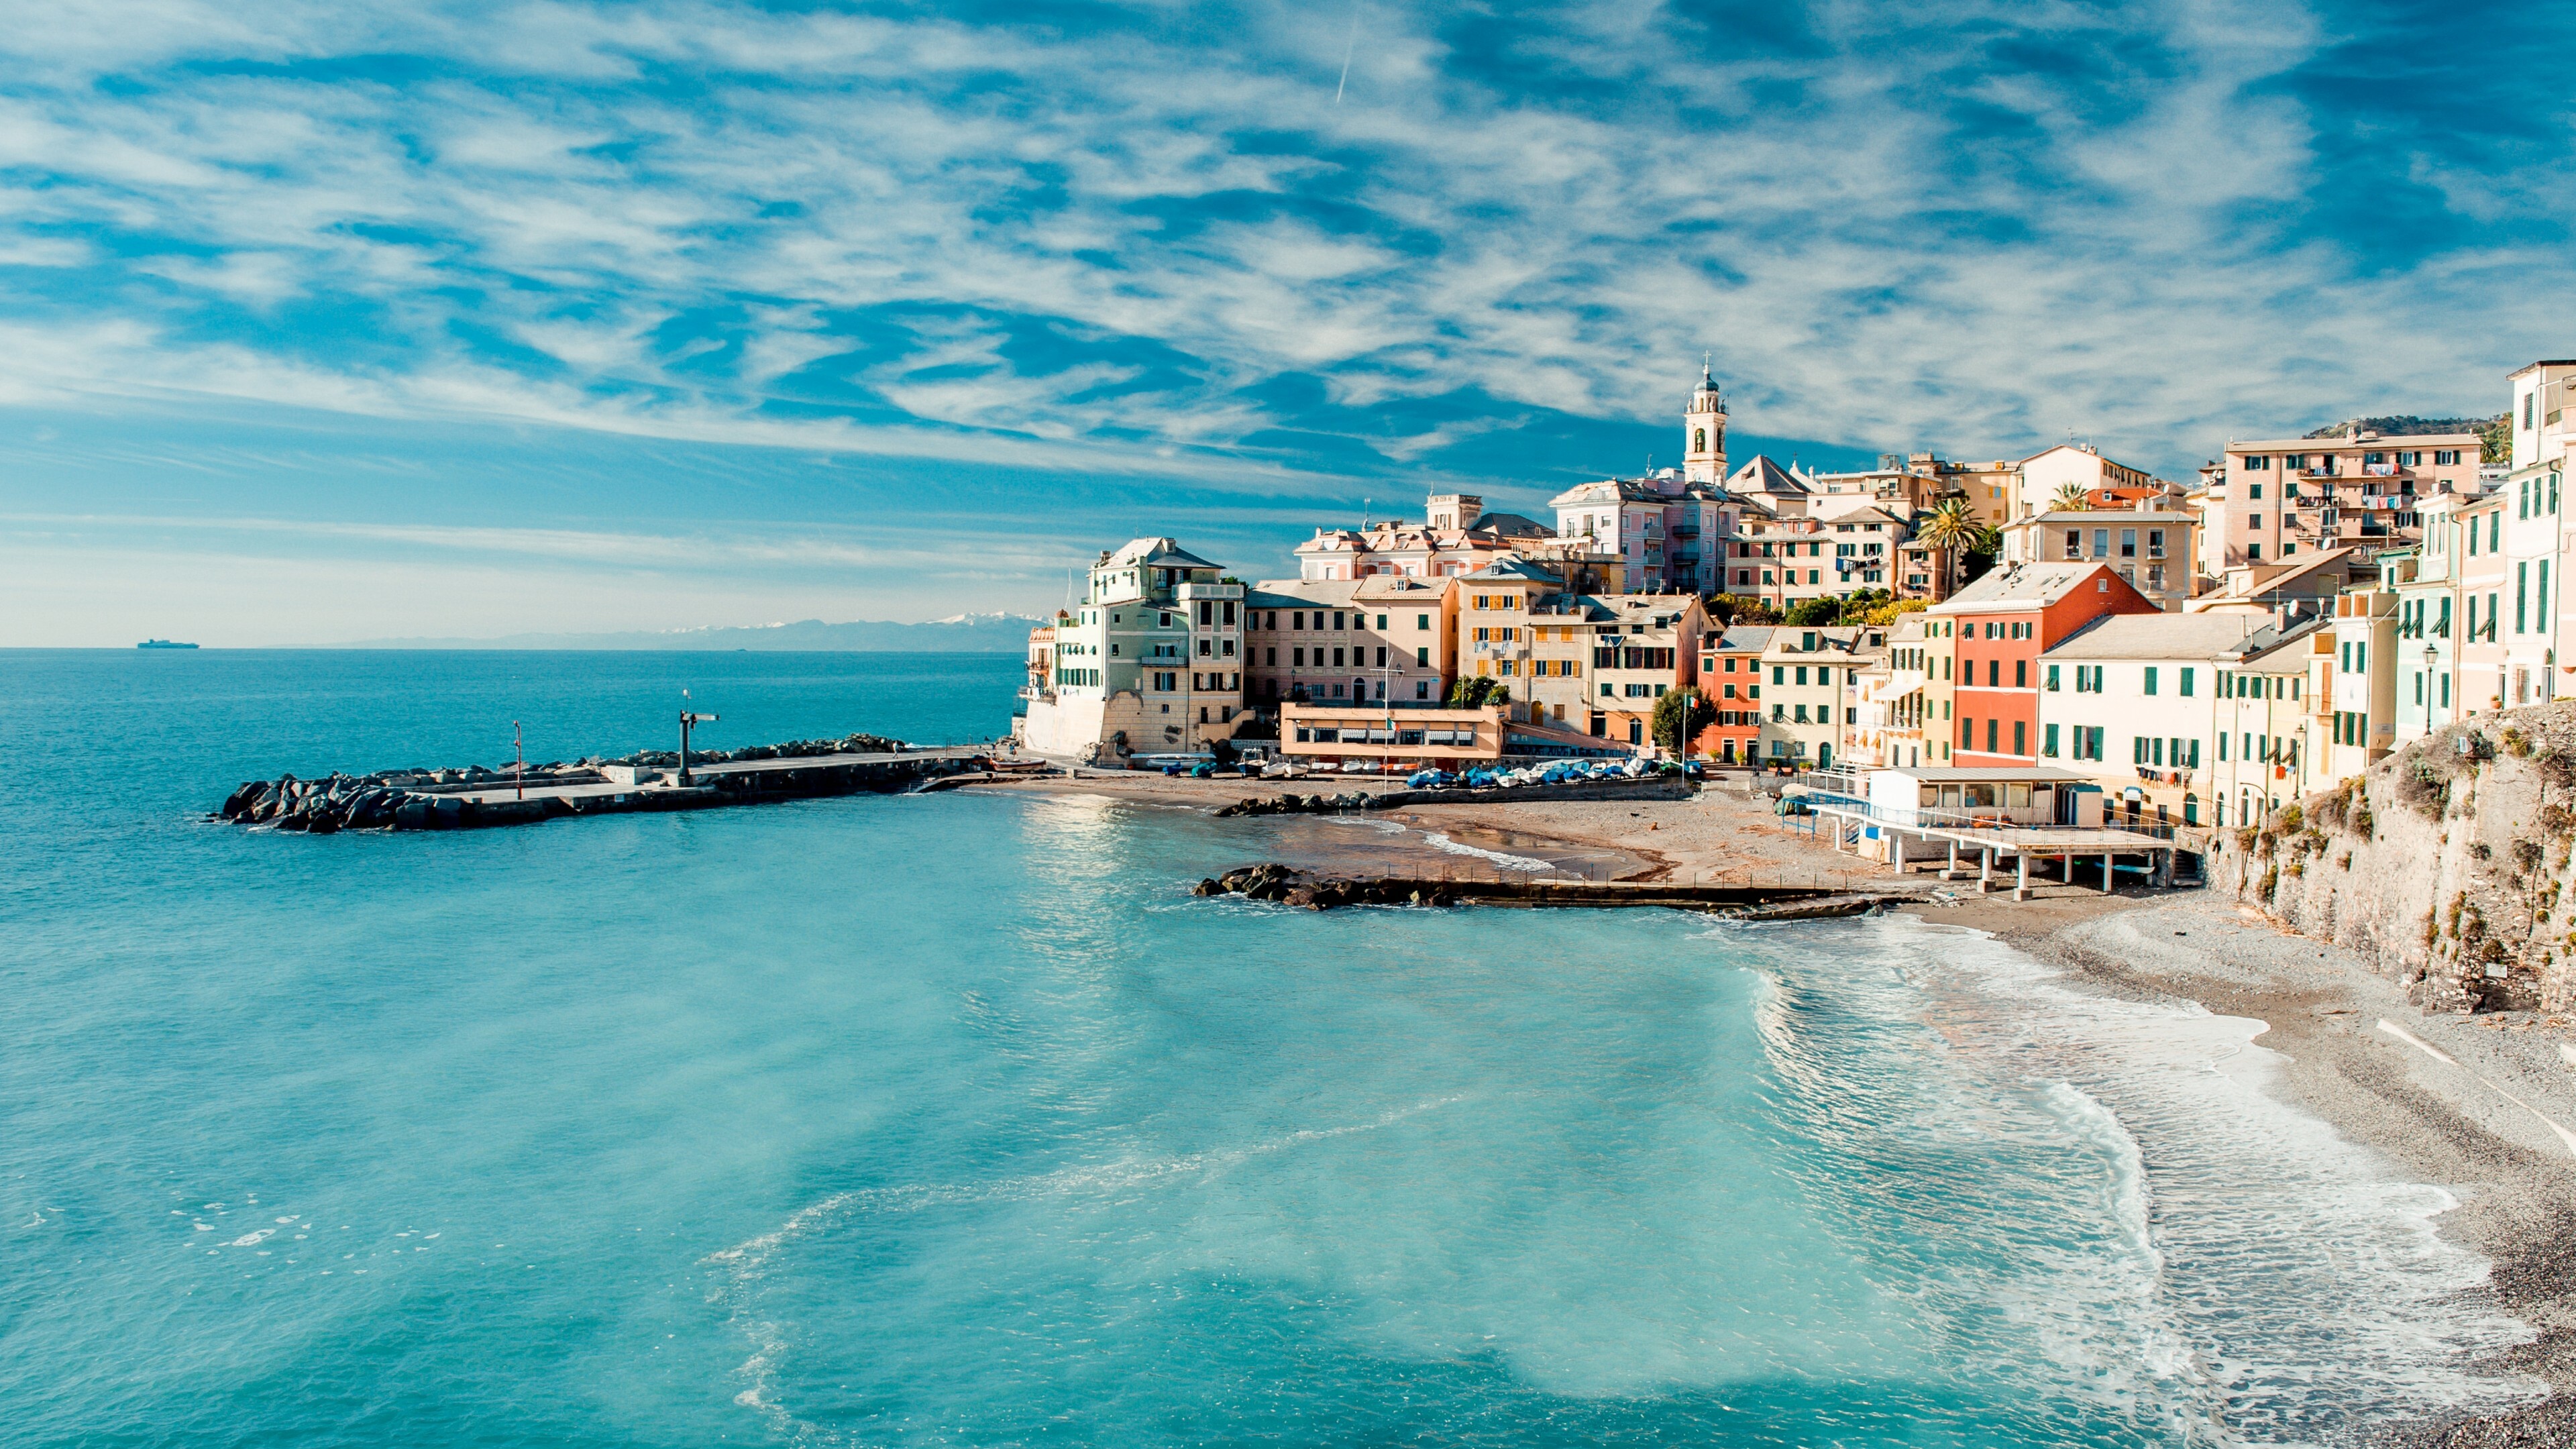 Italy: Coast, Located in the middle of the Mediterranean Sea and delimited by the Alps. 3840x2160 4K Wallpaper.